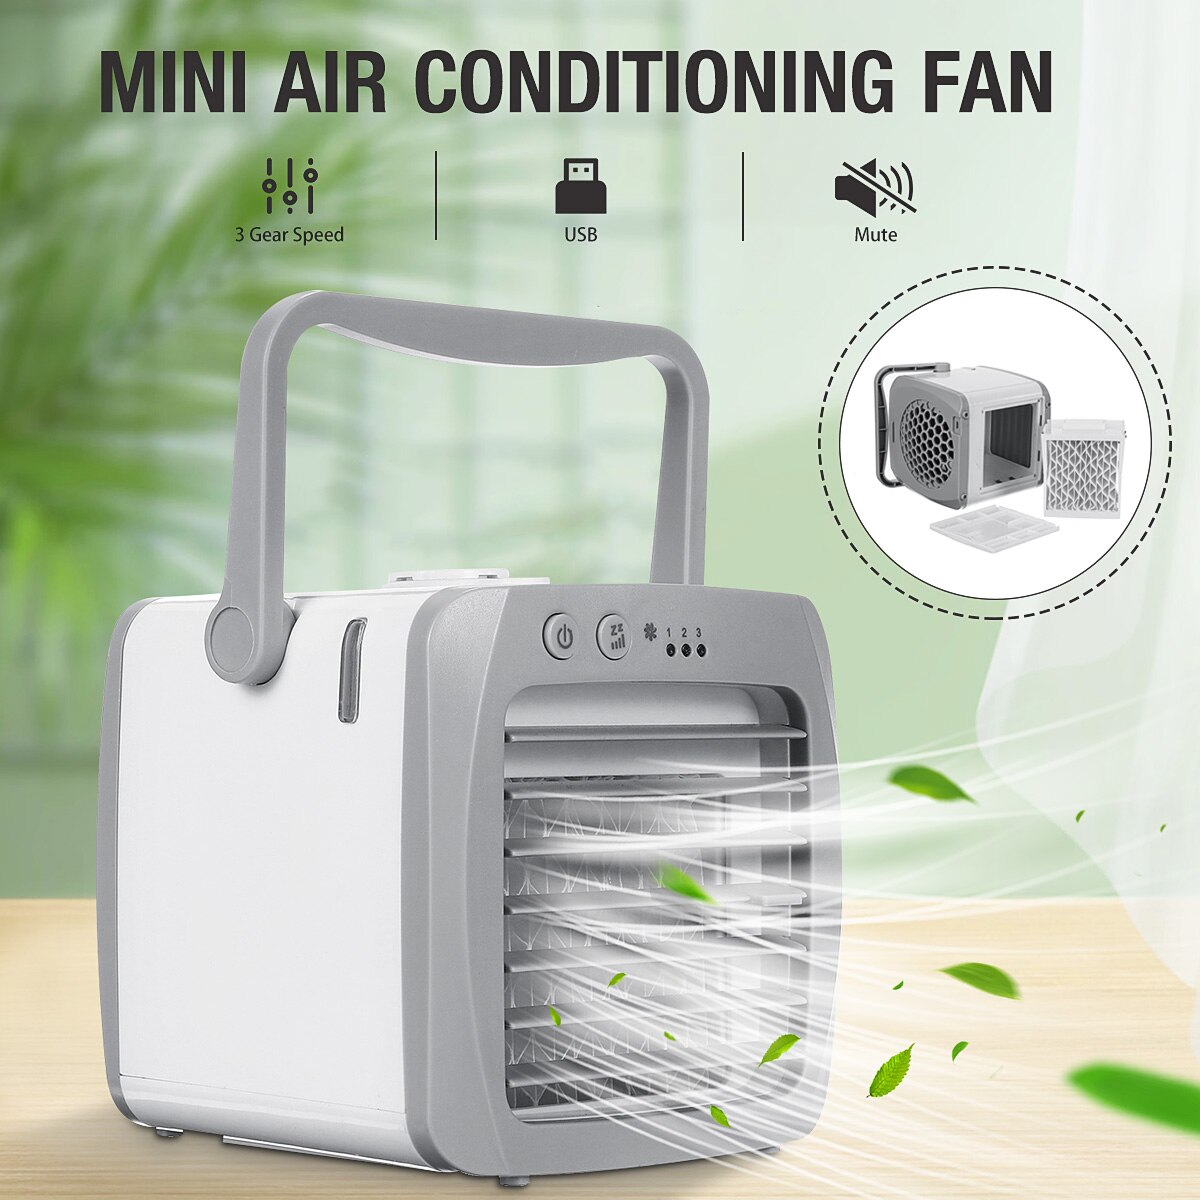 Home Mini Air Conditioner Portable Air Cooler Personal Space Air Cooling USB Rechargeable Air Conditioning 3 Speeds Desk Fan